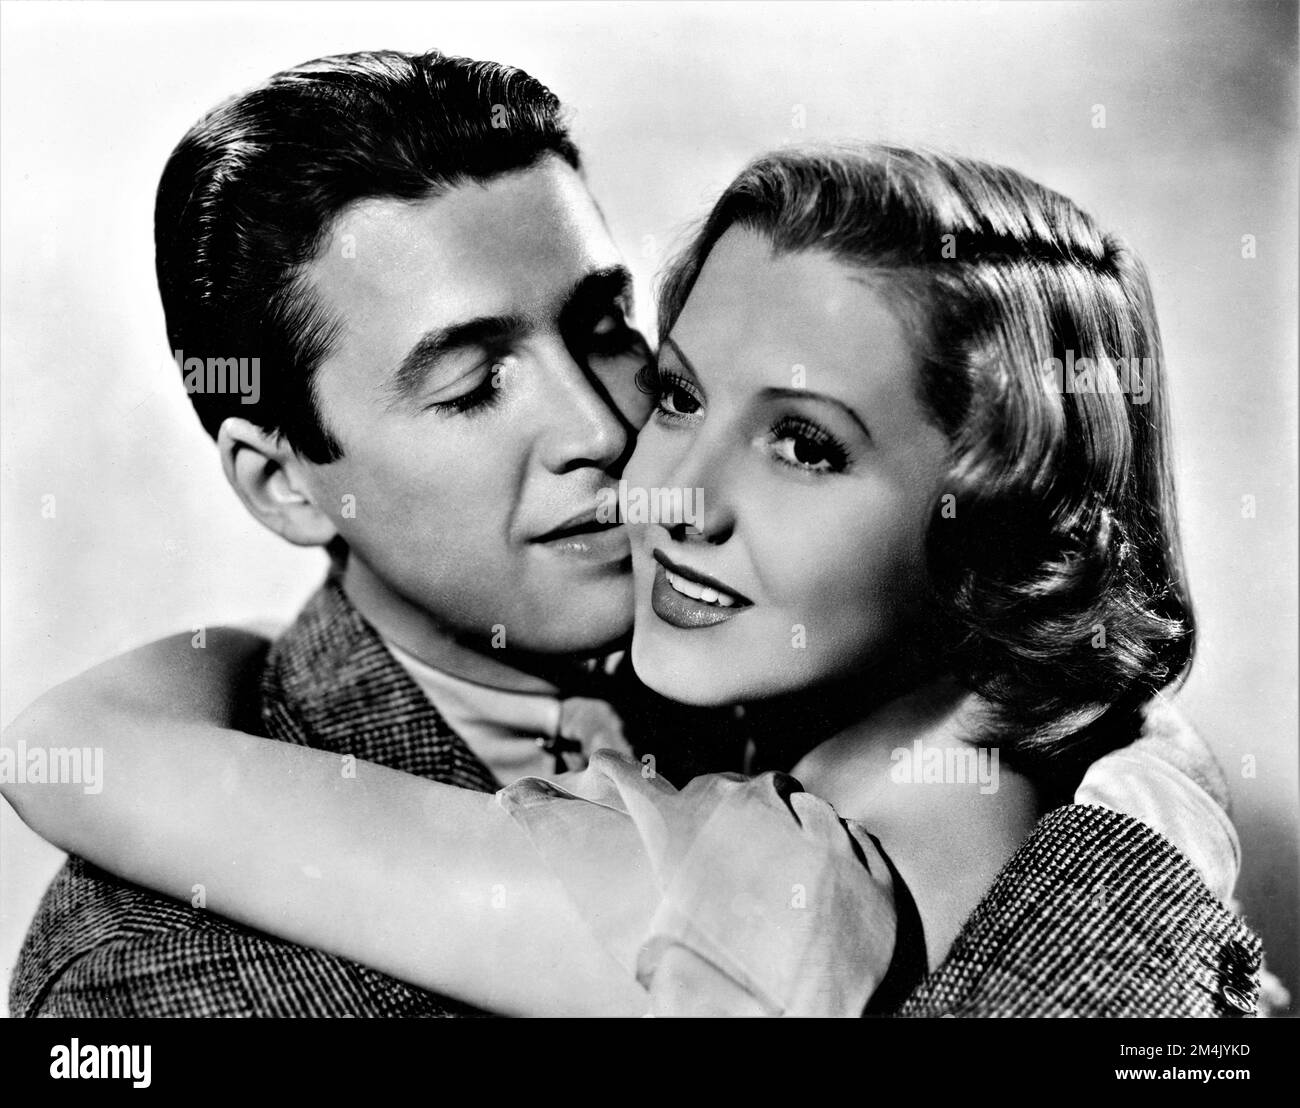 JAMES STEWART and JEAN ARTHUR publicity portrait in MR. SMITH GOES TO WASHINGTON 1939 director FRANK CAPRA story Lewis R. Foster screenplay Sidney Buchman music Dimitri Tiomkin Columbia Pictures Stock Photo